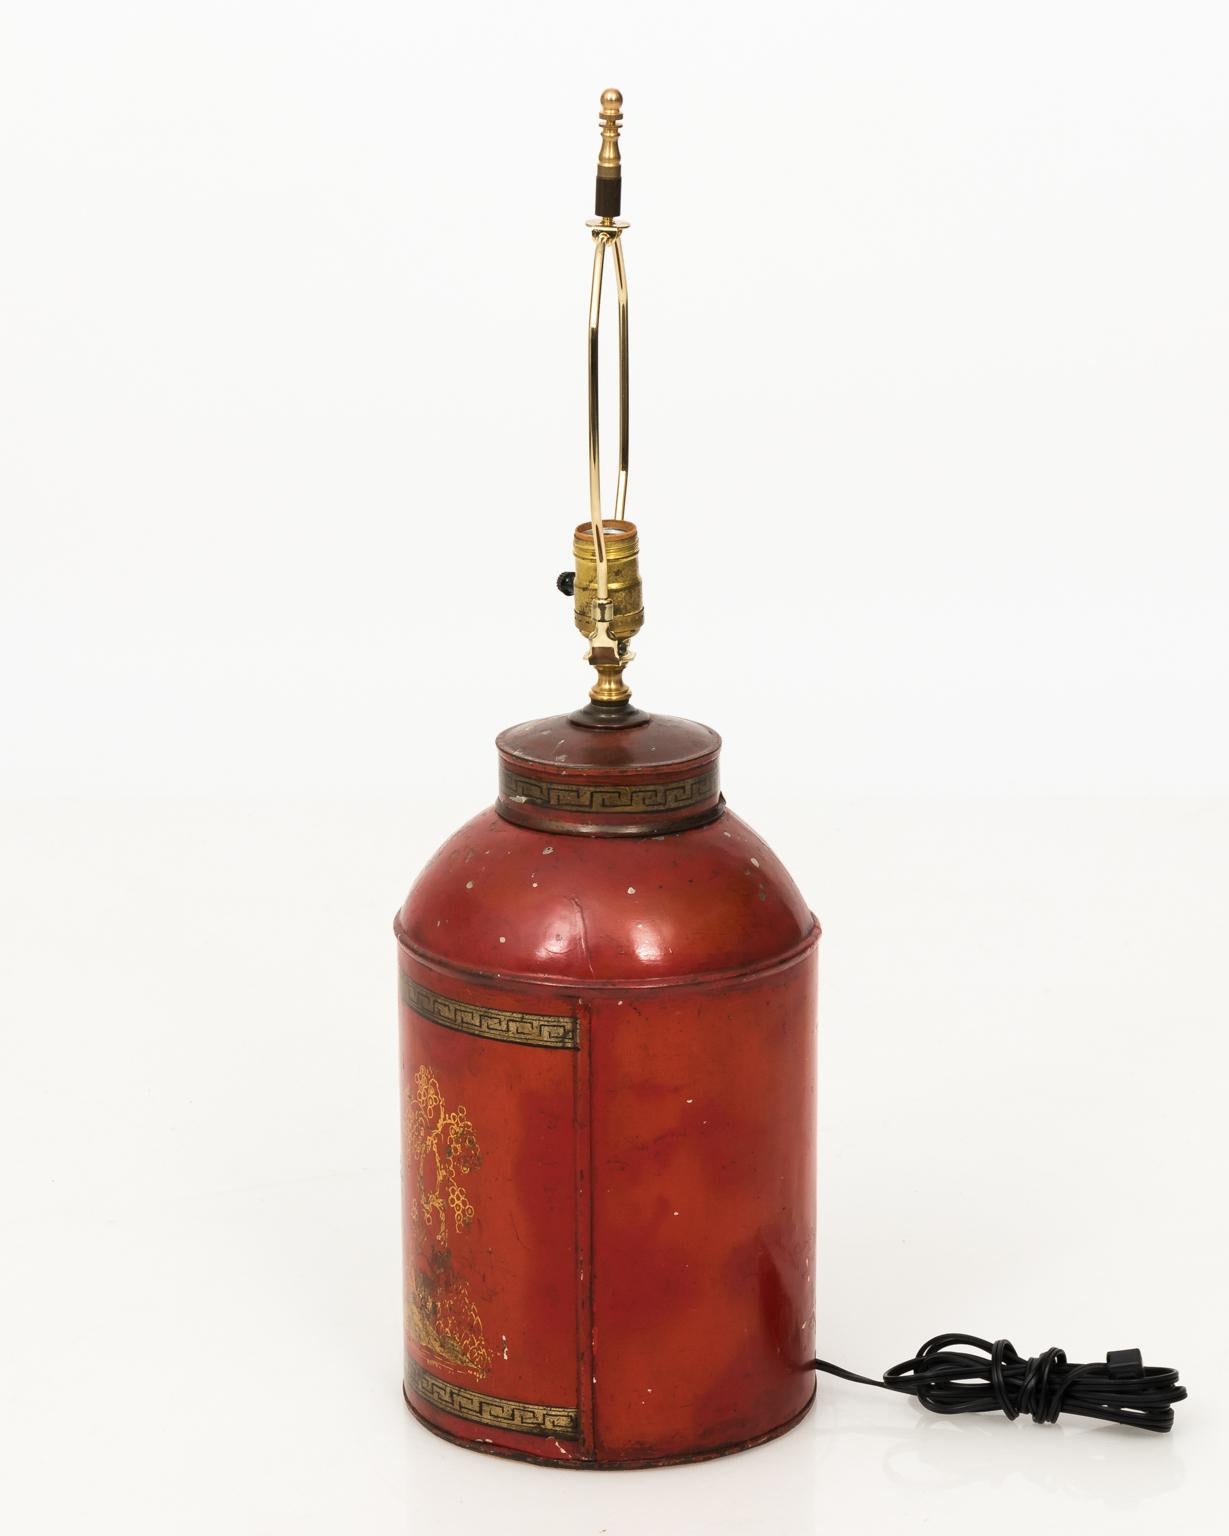 English Chinoiserie style red painted tea canister lamps with gold painted figures. Shade not included, circa 19th century.